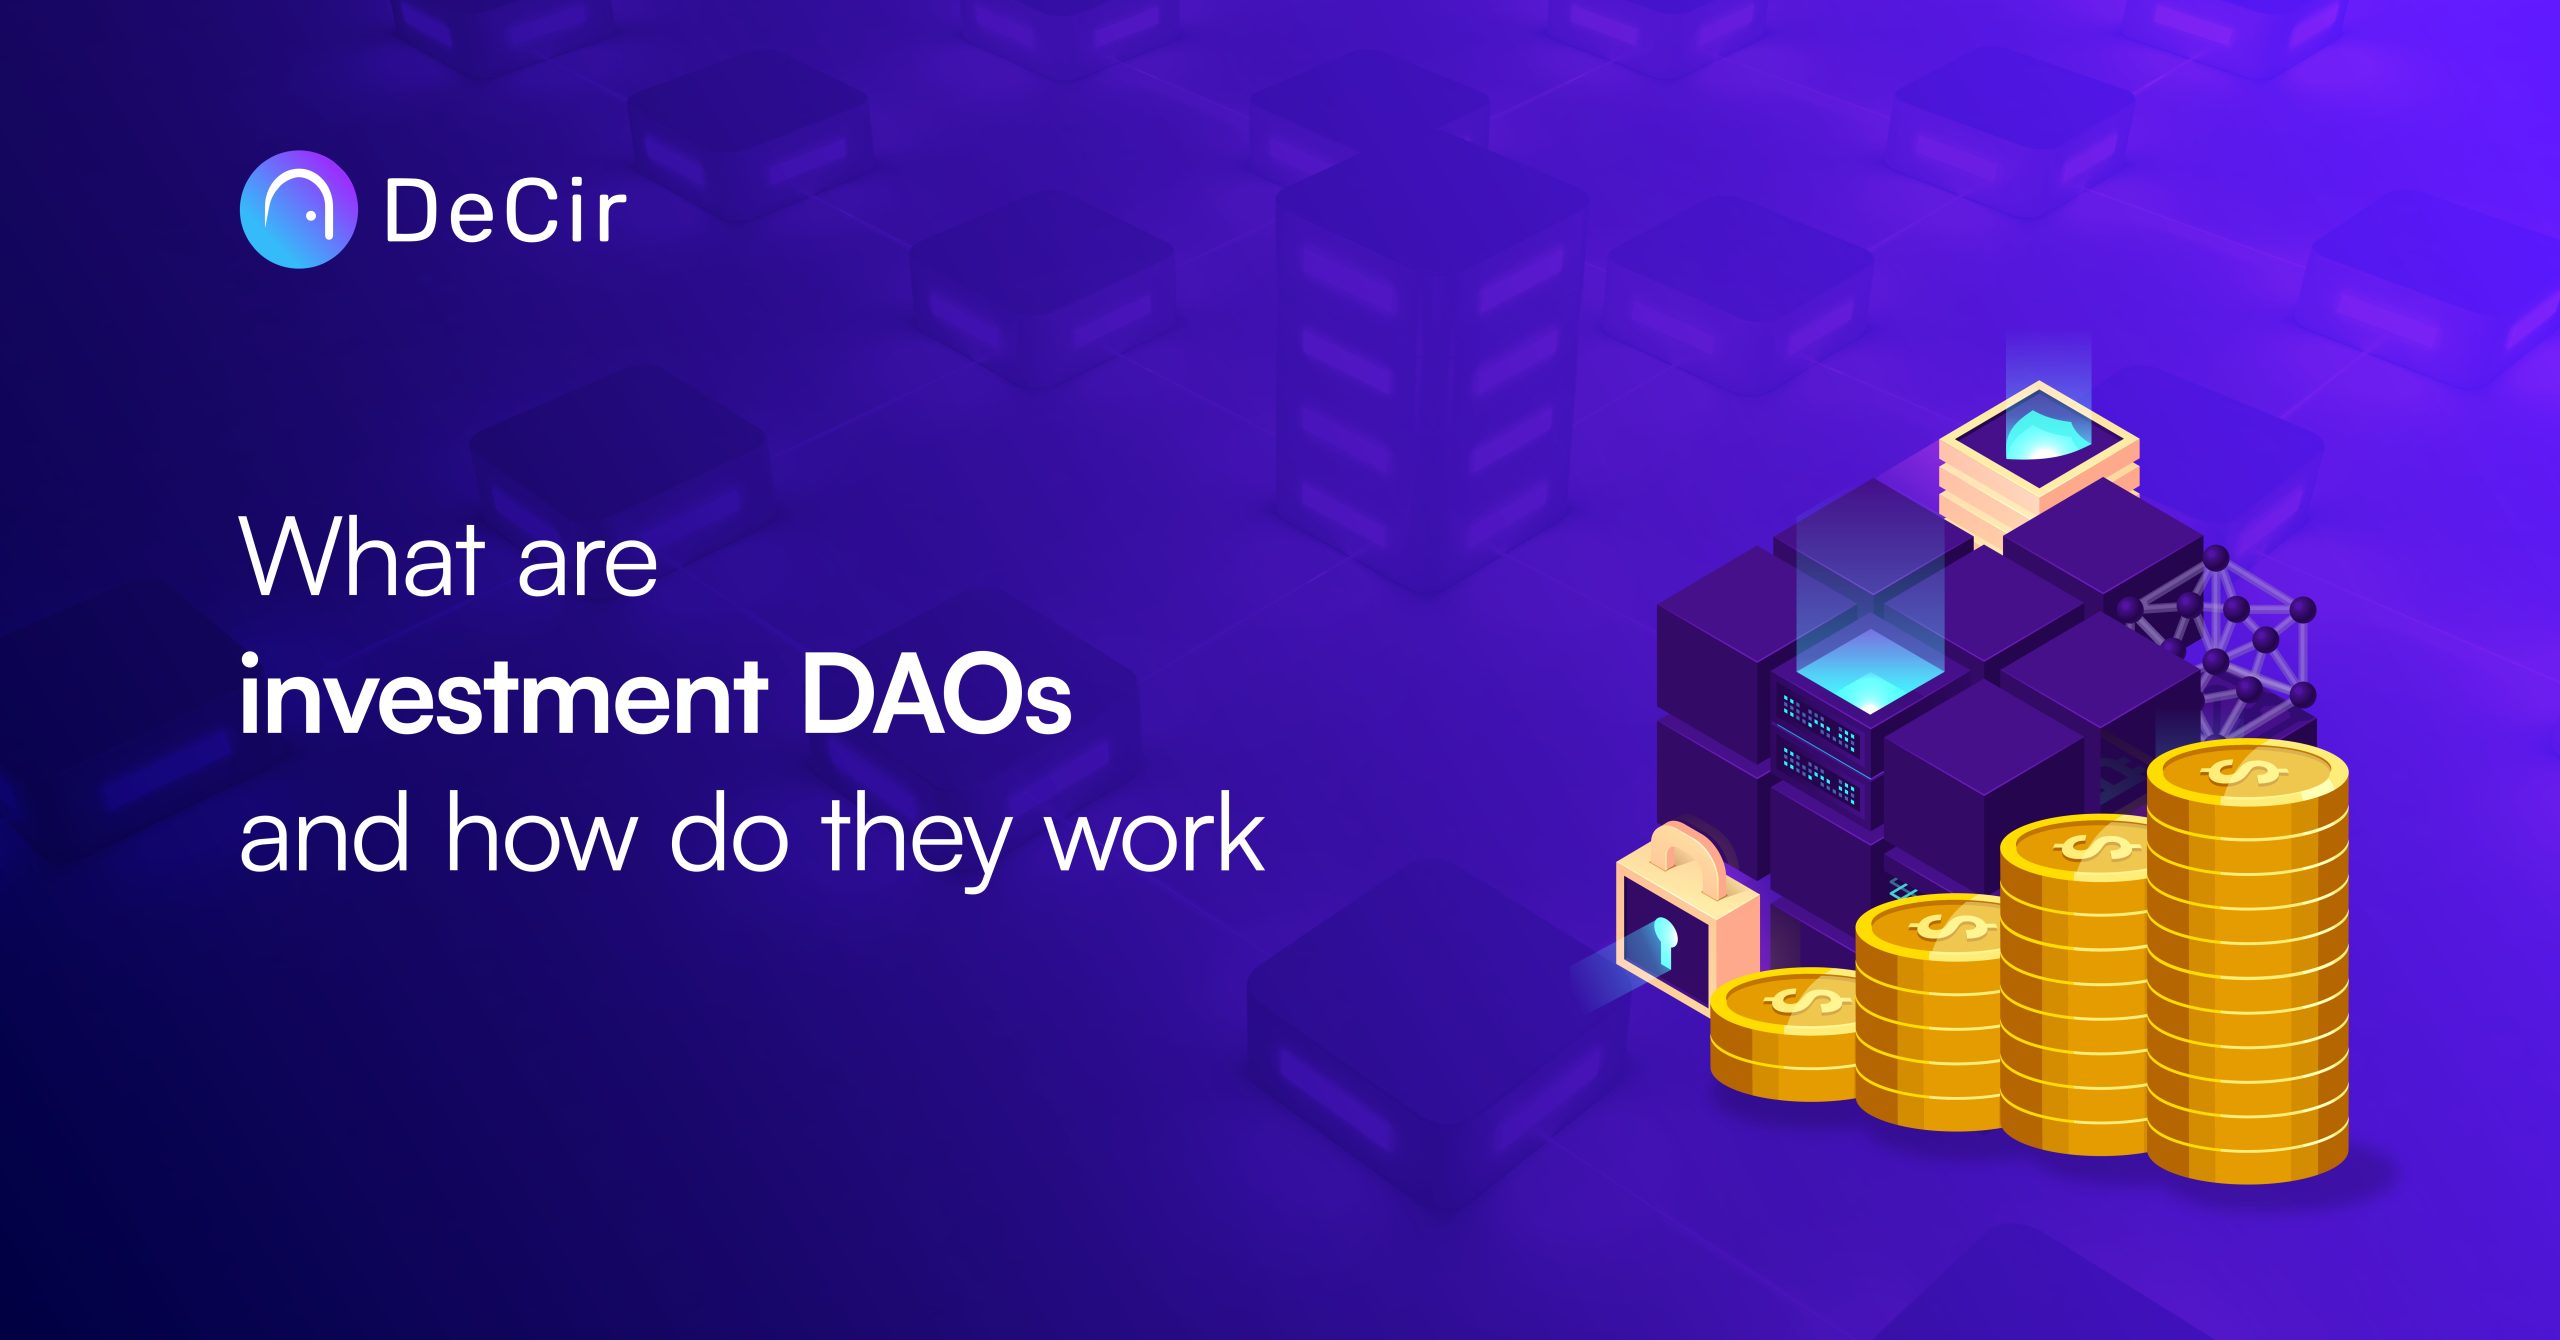 What are investment DAOs and how do they work?